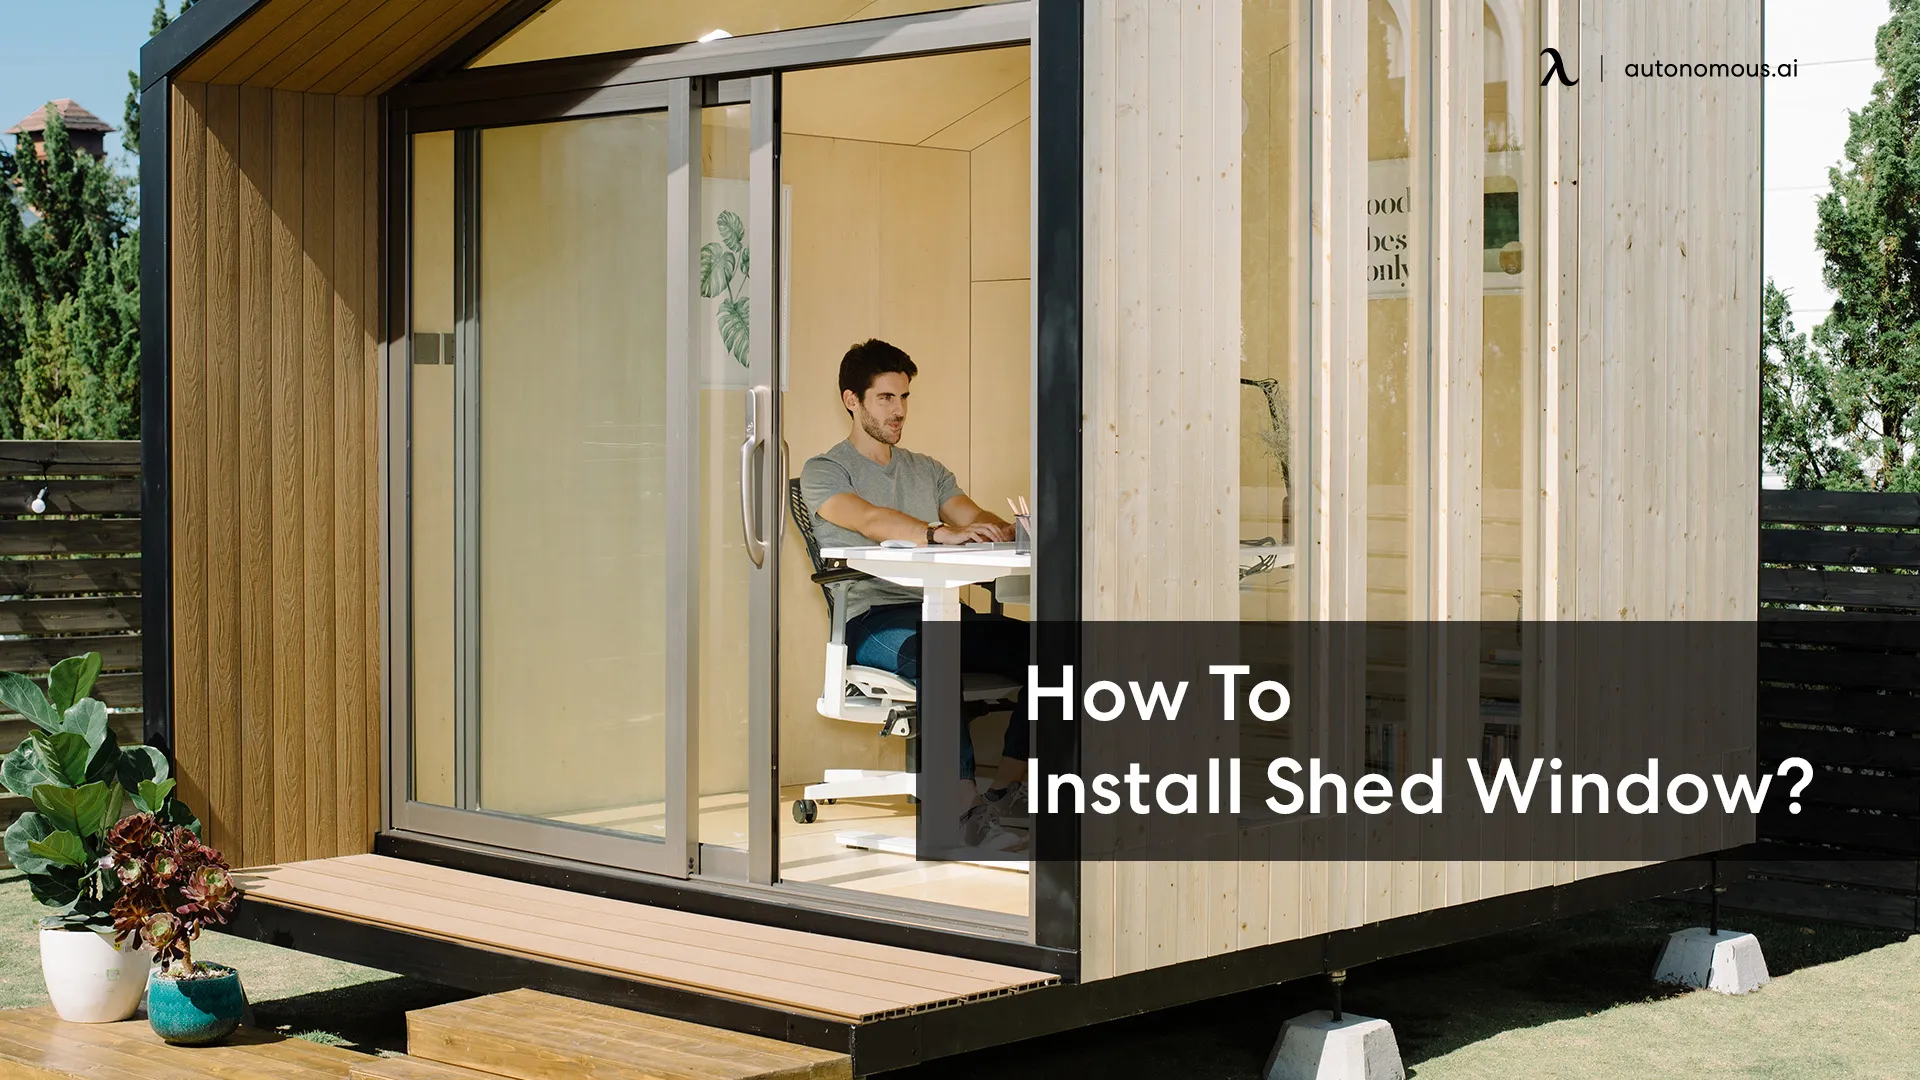 DIY Shed Window Installation: Shedding Light on the Process